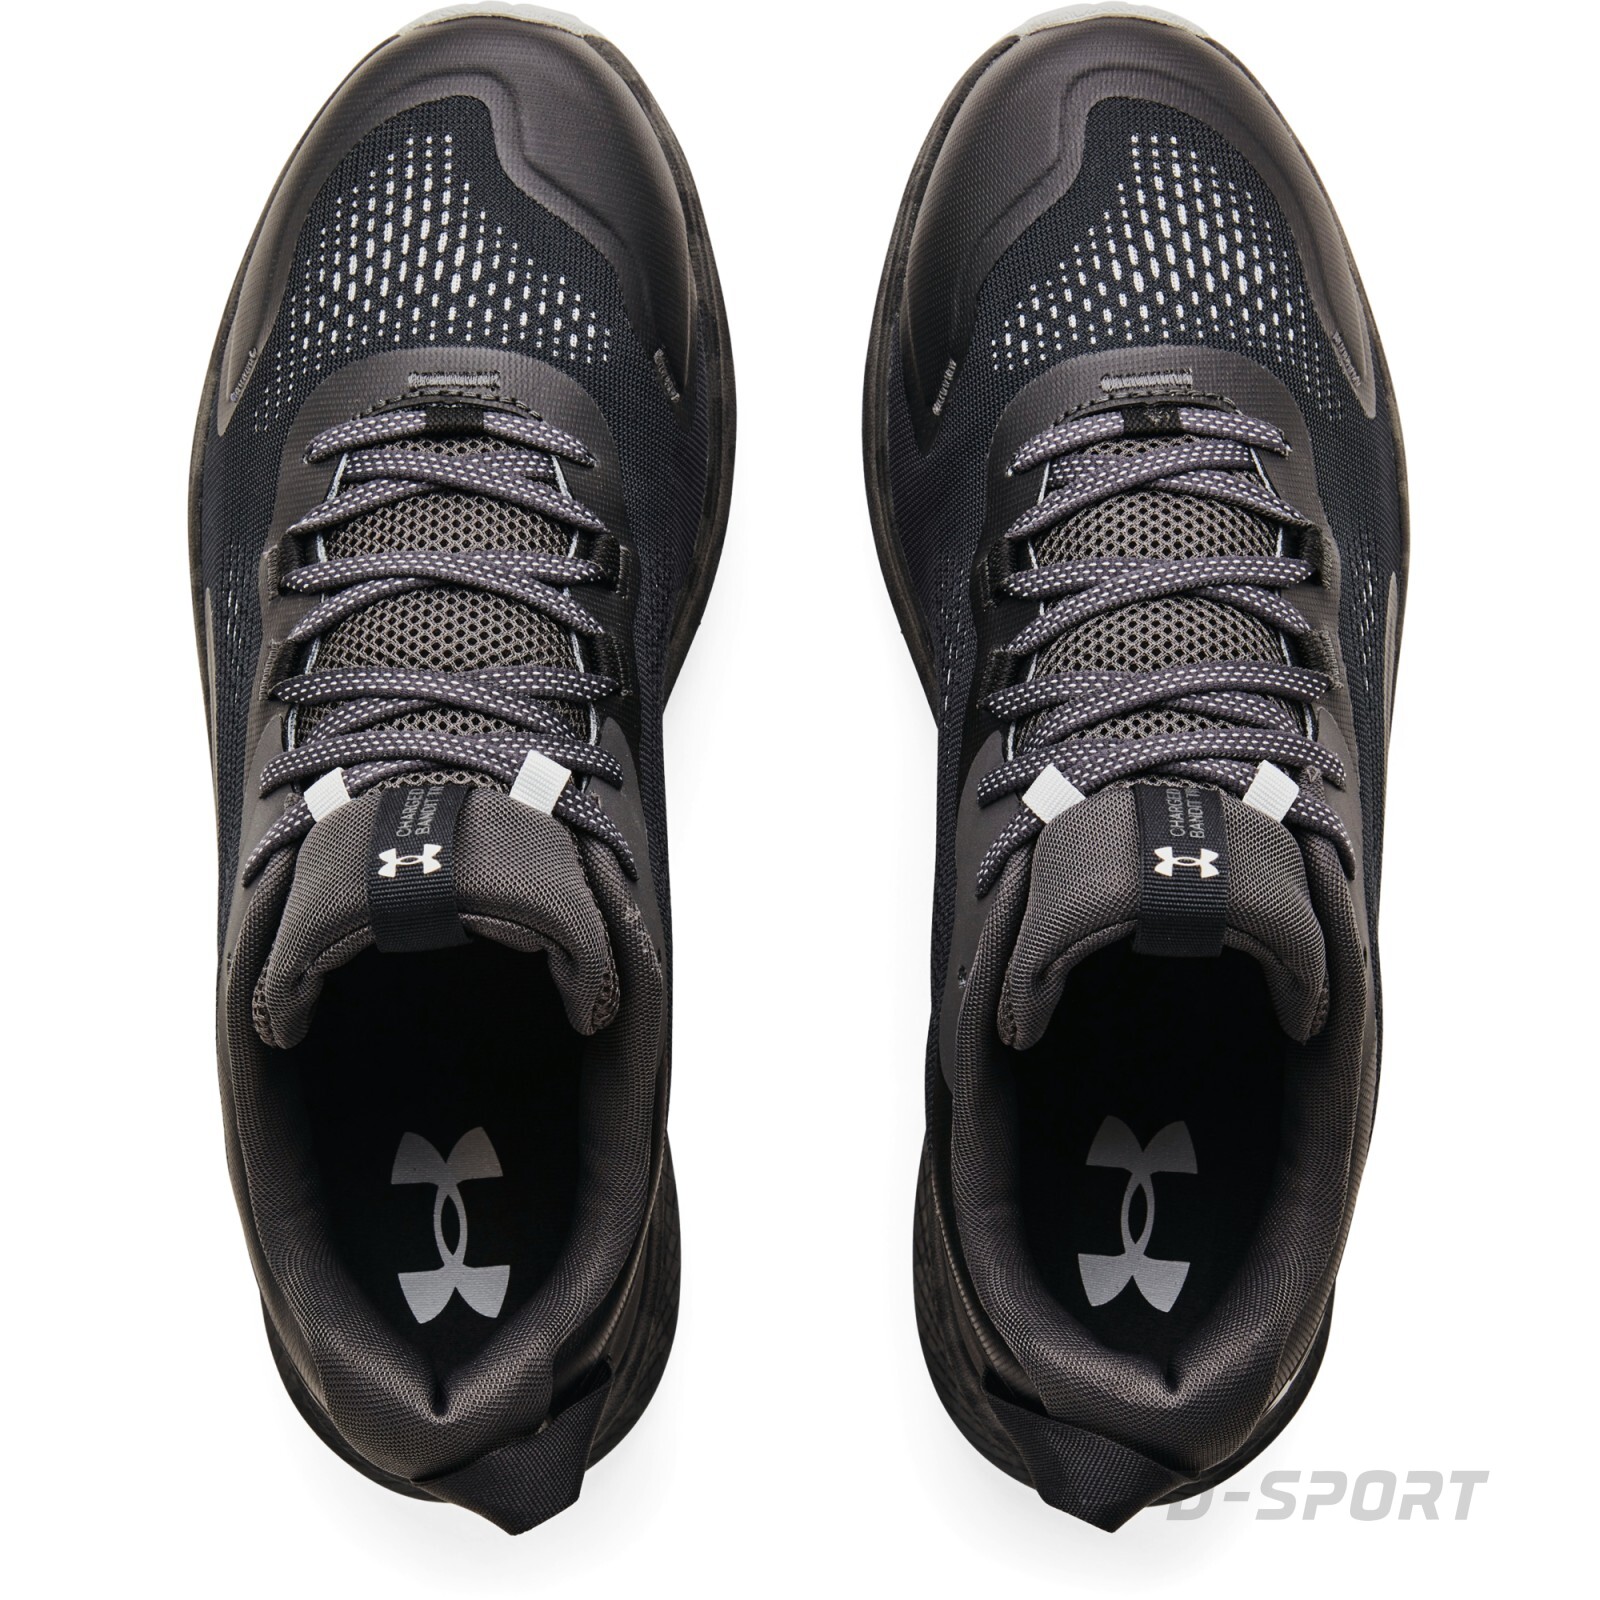 Under Armour UA Charged Bandit TR 2